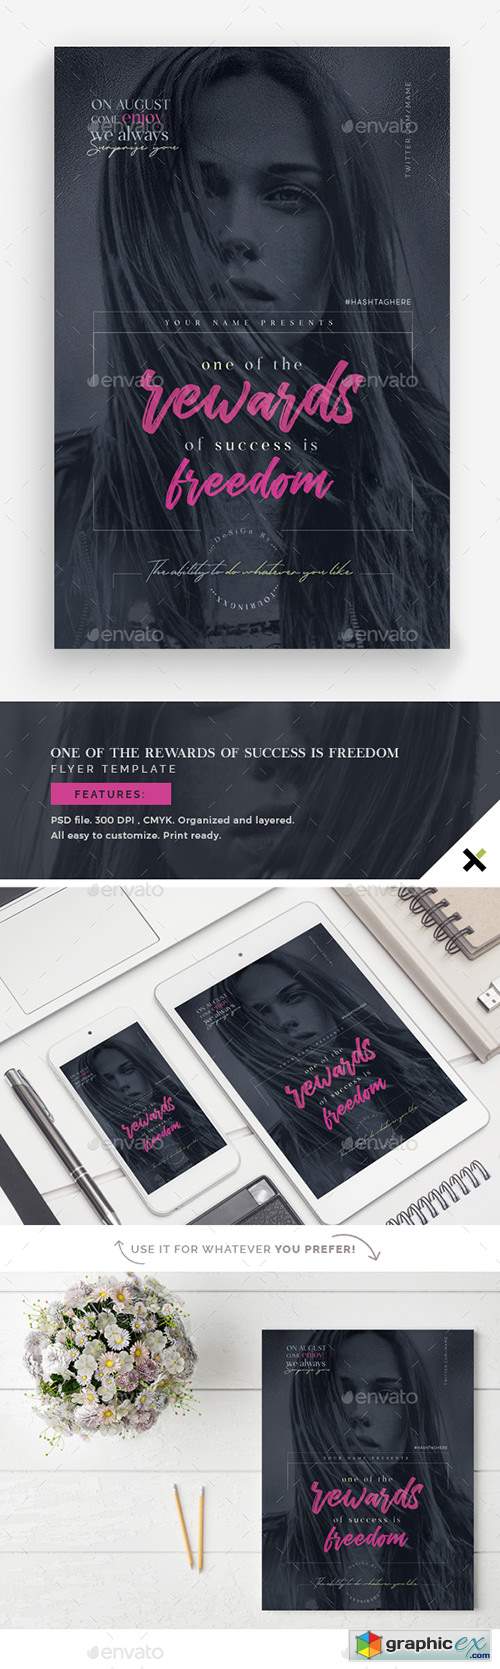 On Of the Rewards of Success is Freedom Flyer Template